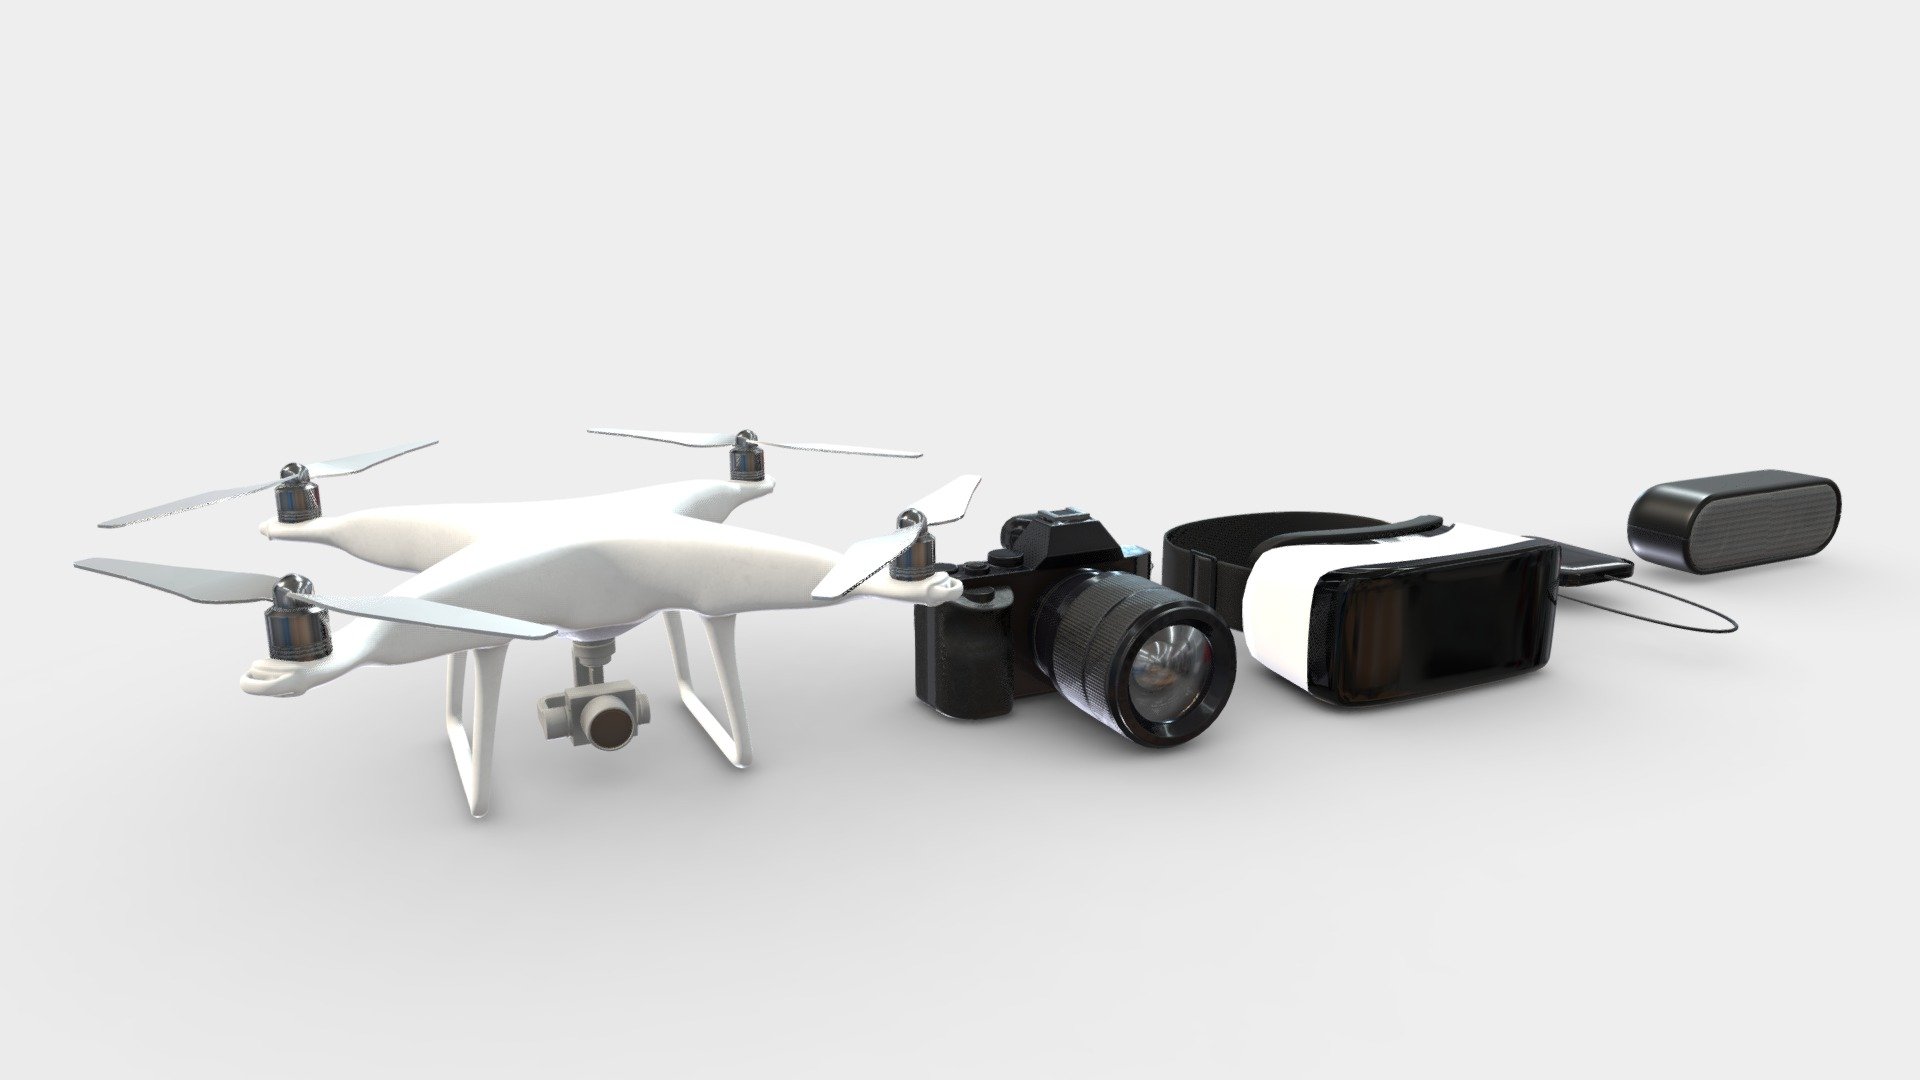 Generic branding technology pack! Includes the following models (also available separately) :

Drone 
DSLR Digital Camera
Mobile VR Headset
Mobile Harddrive
Bluetooth Wireless Speaker

Non-branded generic models means these can be used freely without licensing issues 3d model